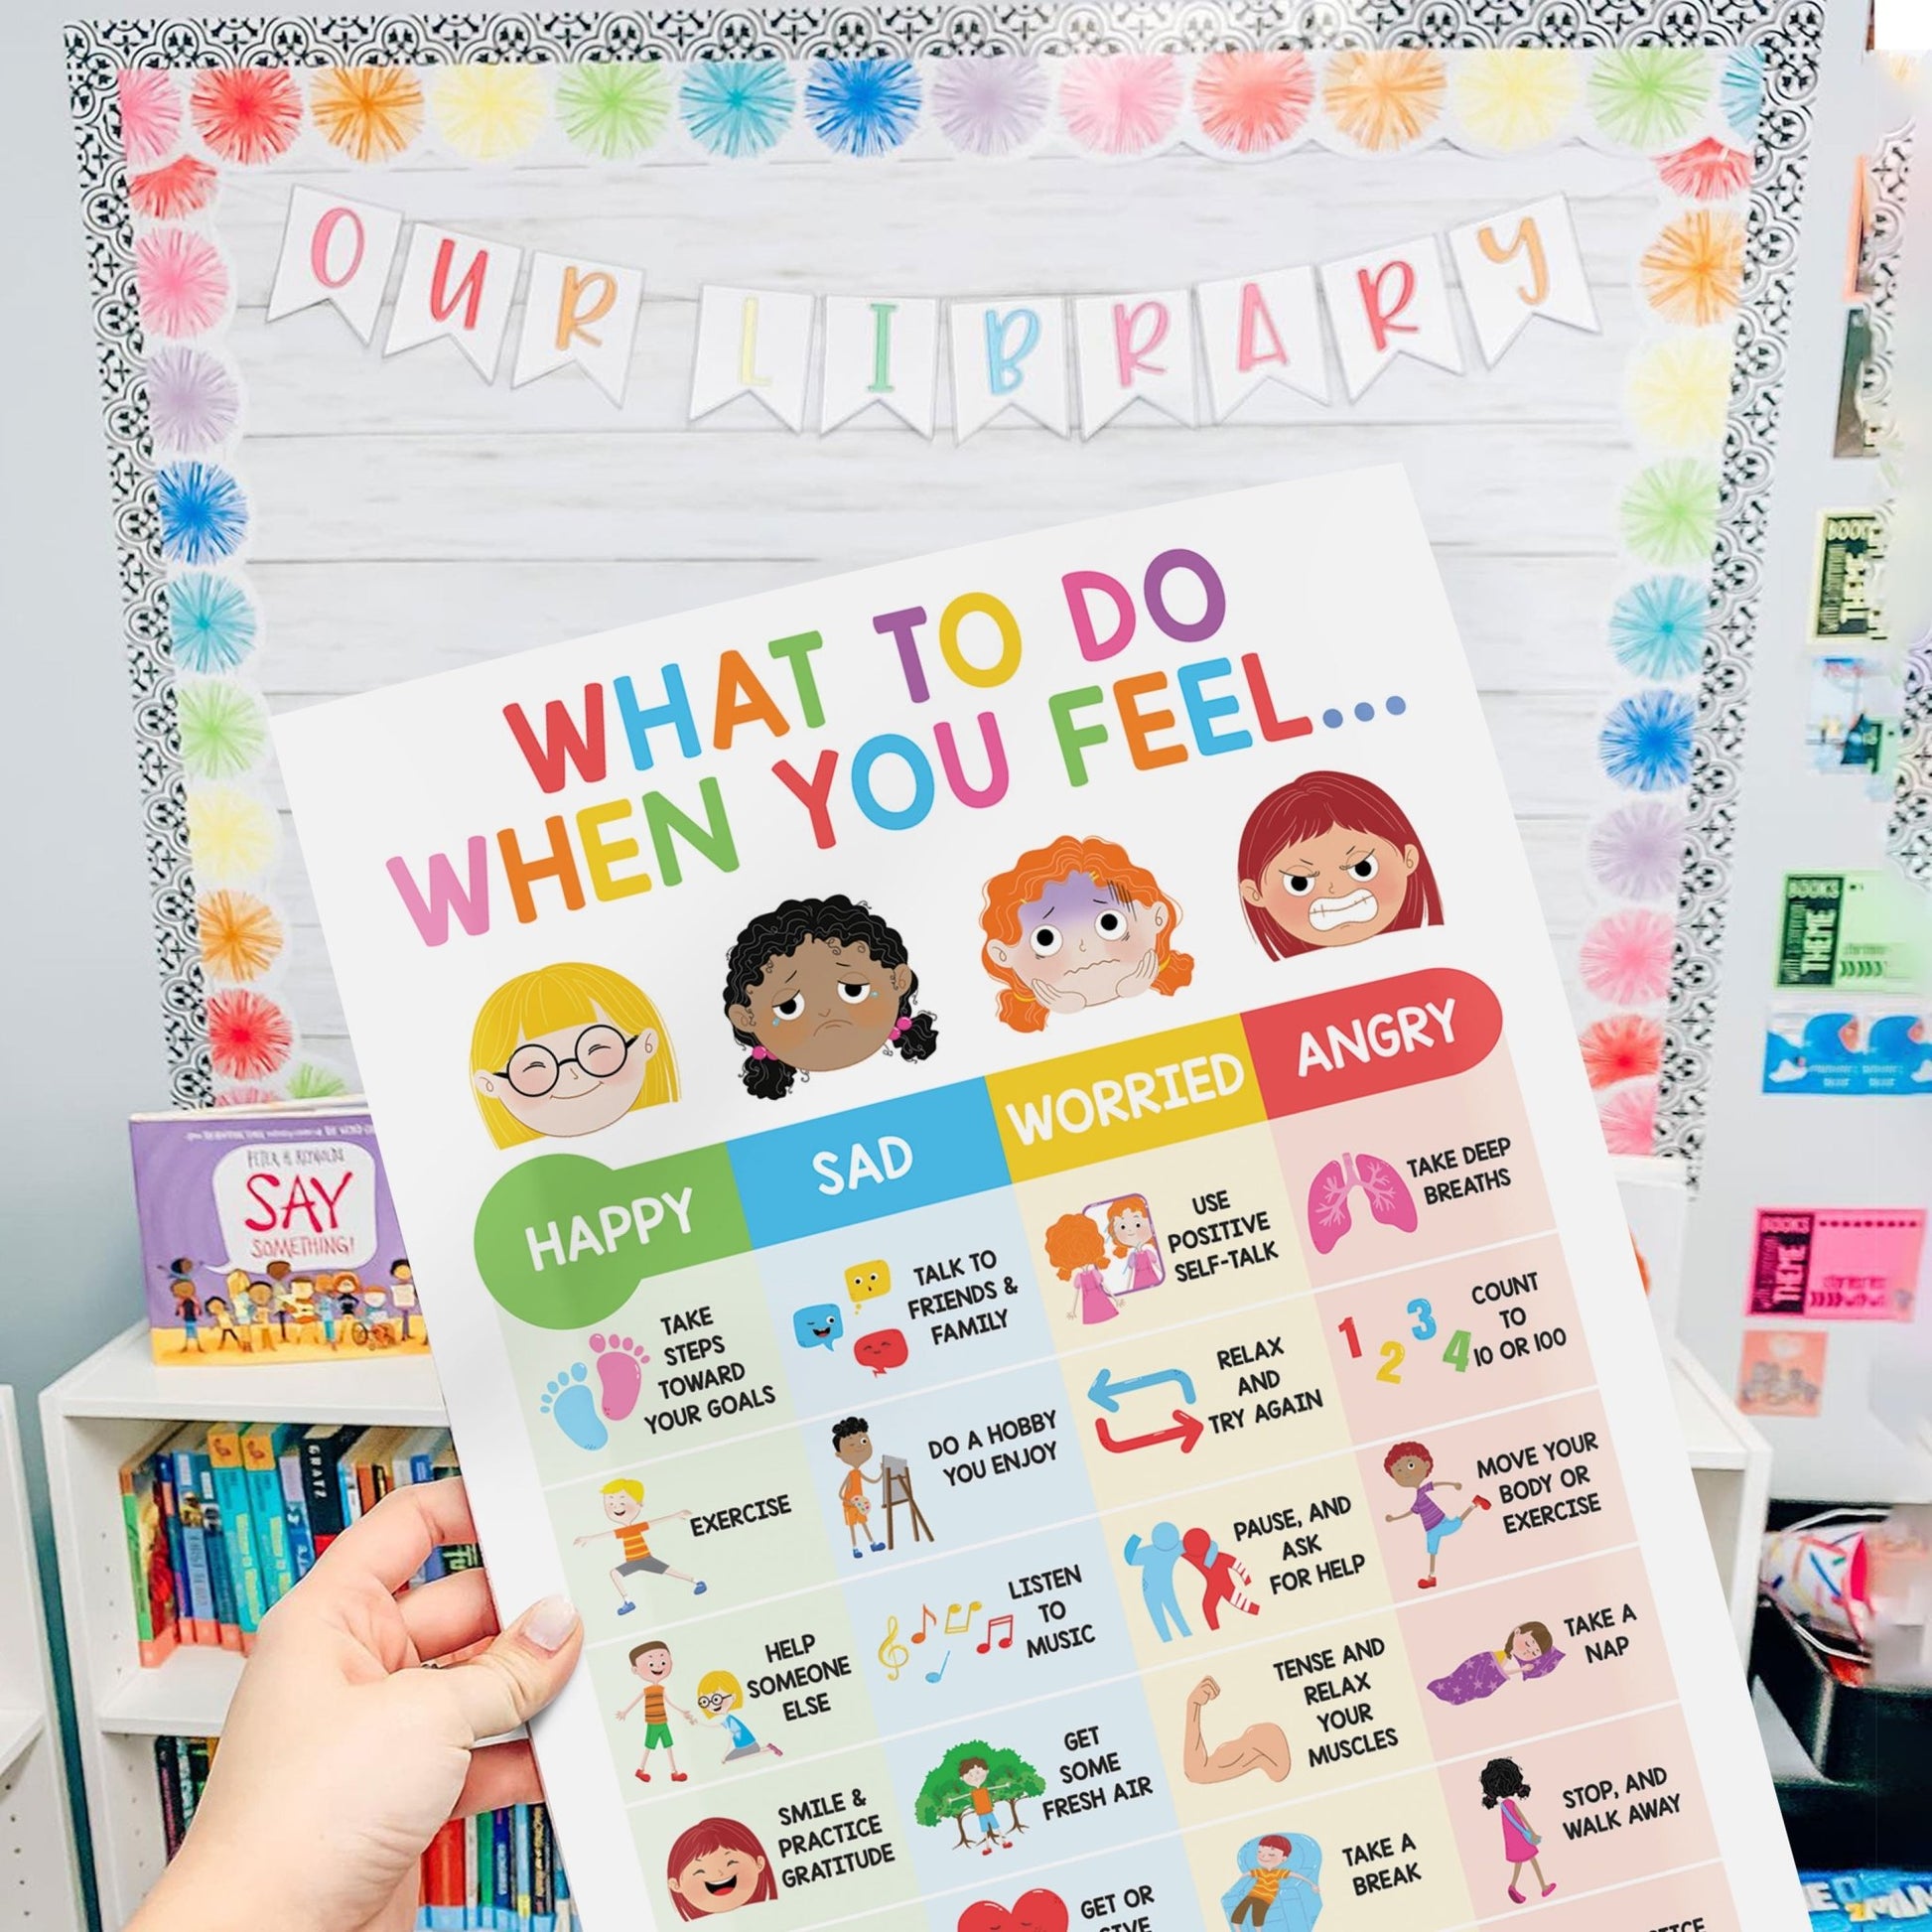 Vibrant What to do when you feel Chart Poster Laminated For Preschoolers/Kids, Educational Posters For Toddlers, Learning Posters For Toddlers 1-3, Preschool Homeschool Posters For Kindergarten Classroom Wall Decor - BEAWART